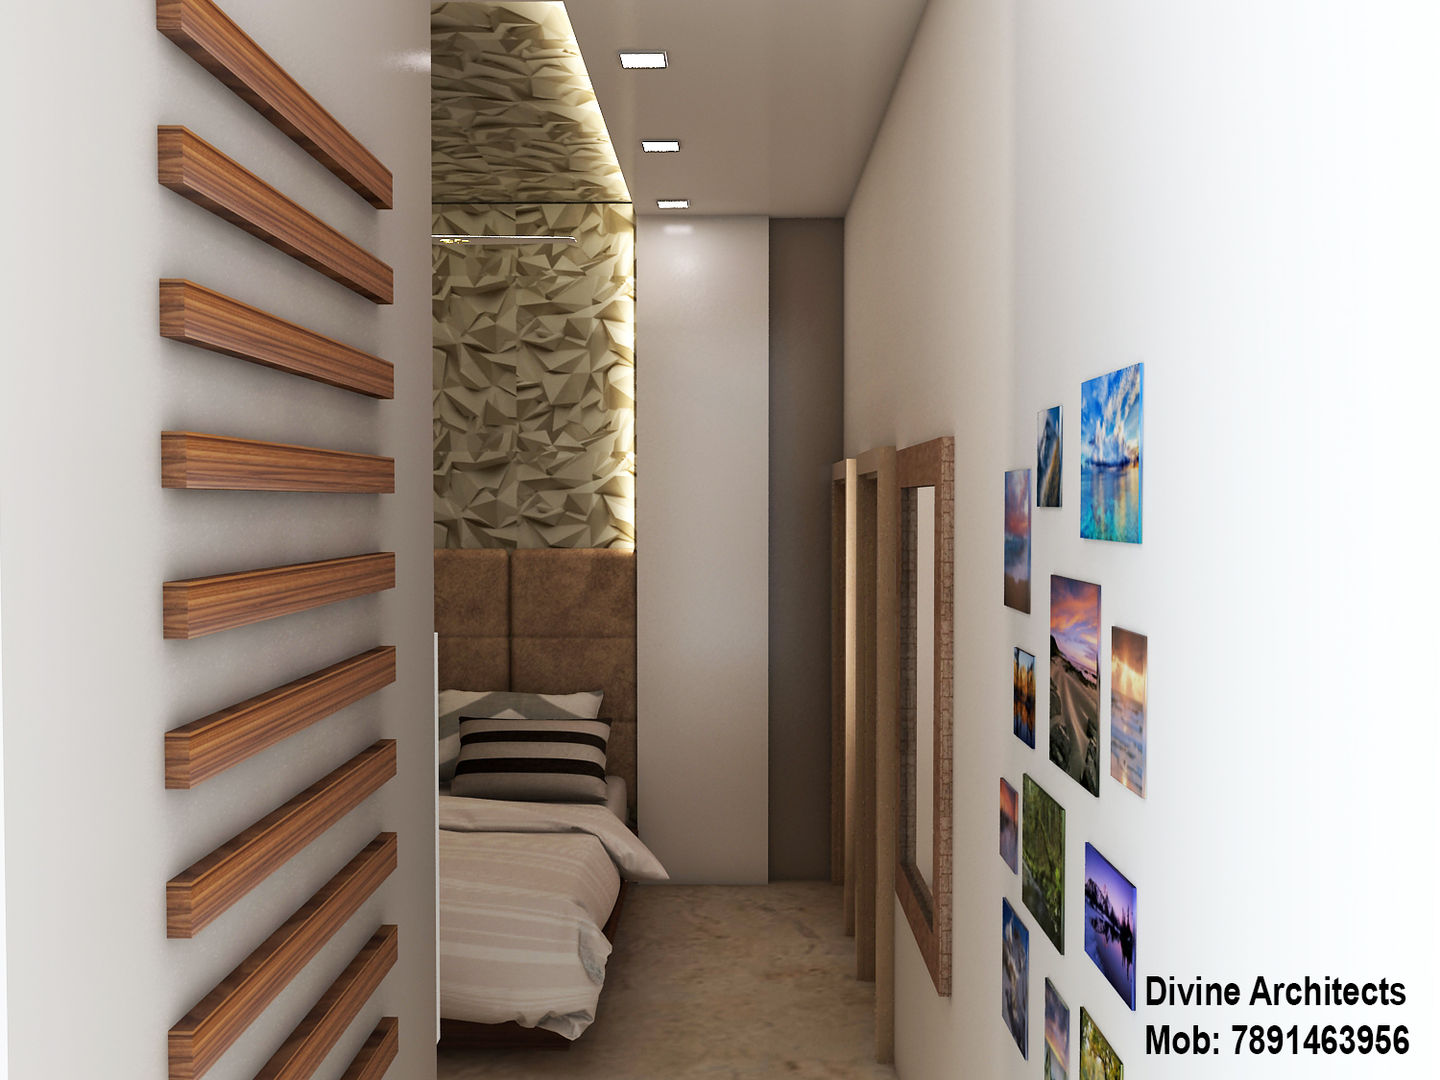 Another bed room interior design for mr. Shyam Gupta Bikaner Rajasthan, divine architects divine architects Phòng ngủ phong cách hiện đại